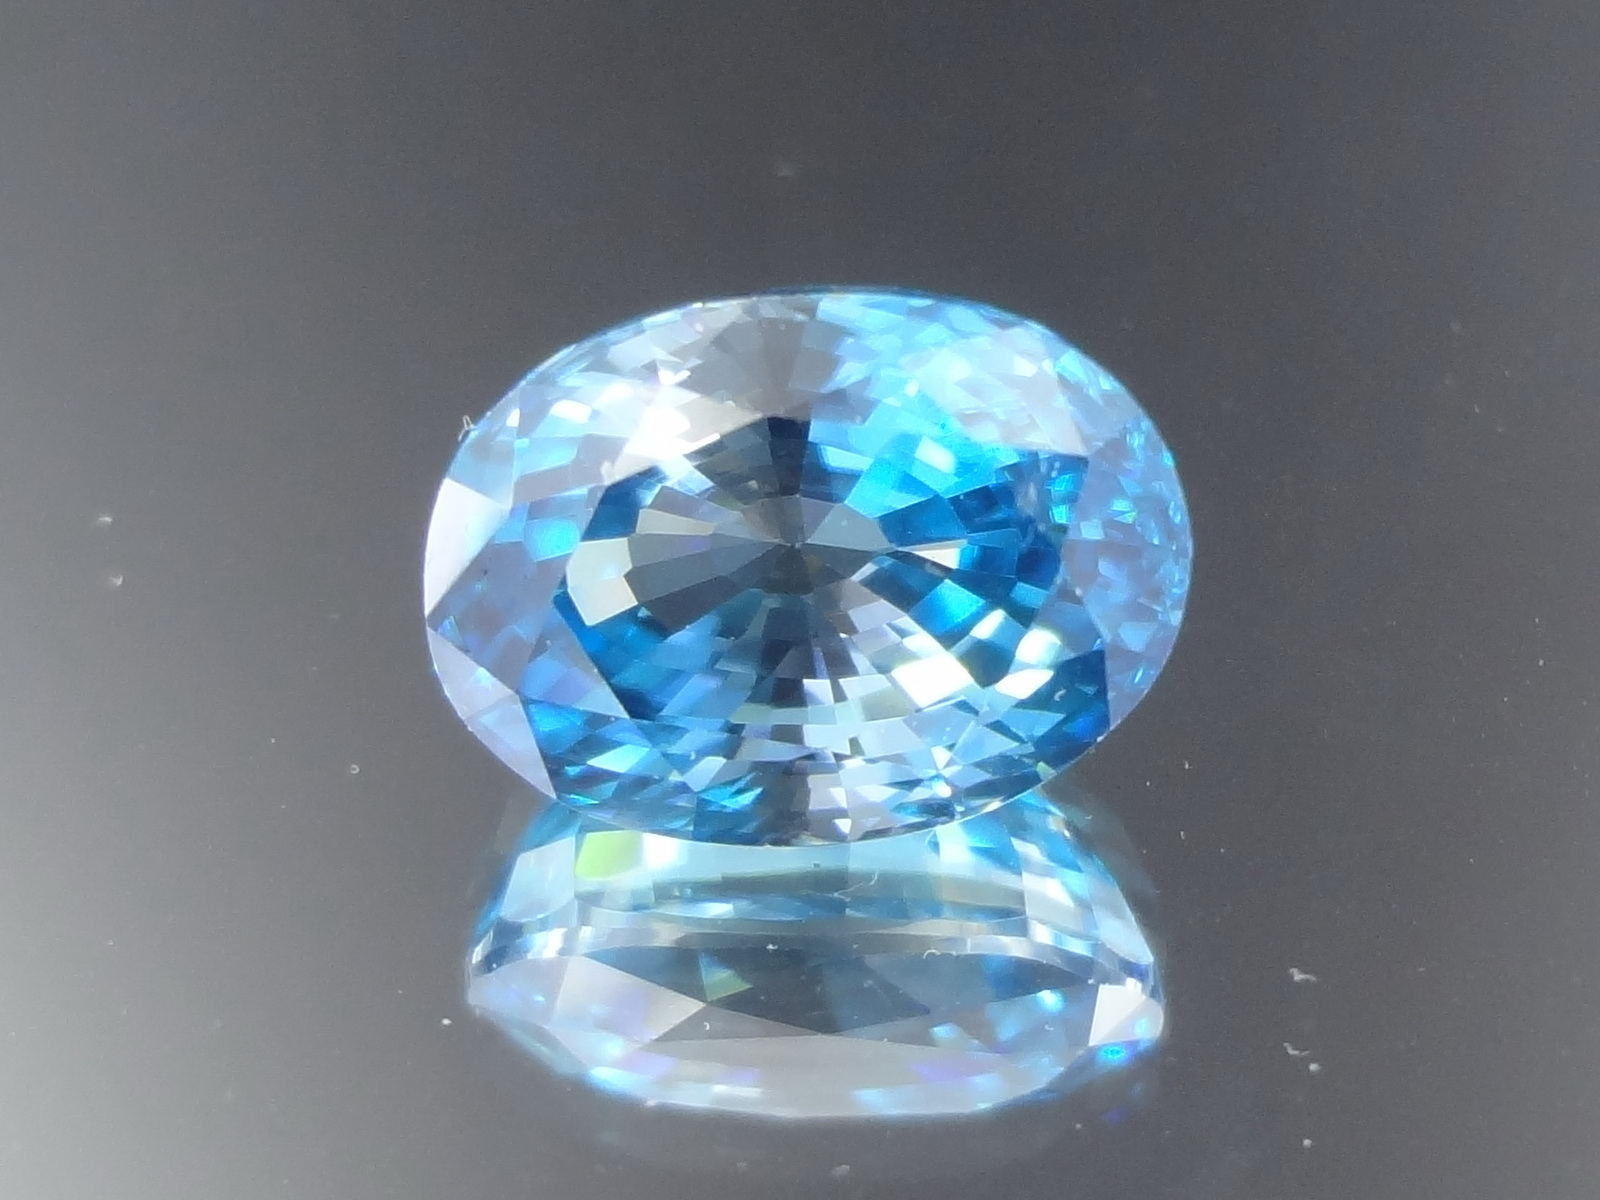 Large Flawless and Shiny Blue Zircon 8.9ct